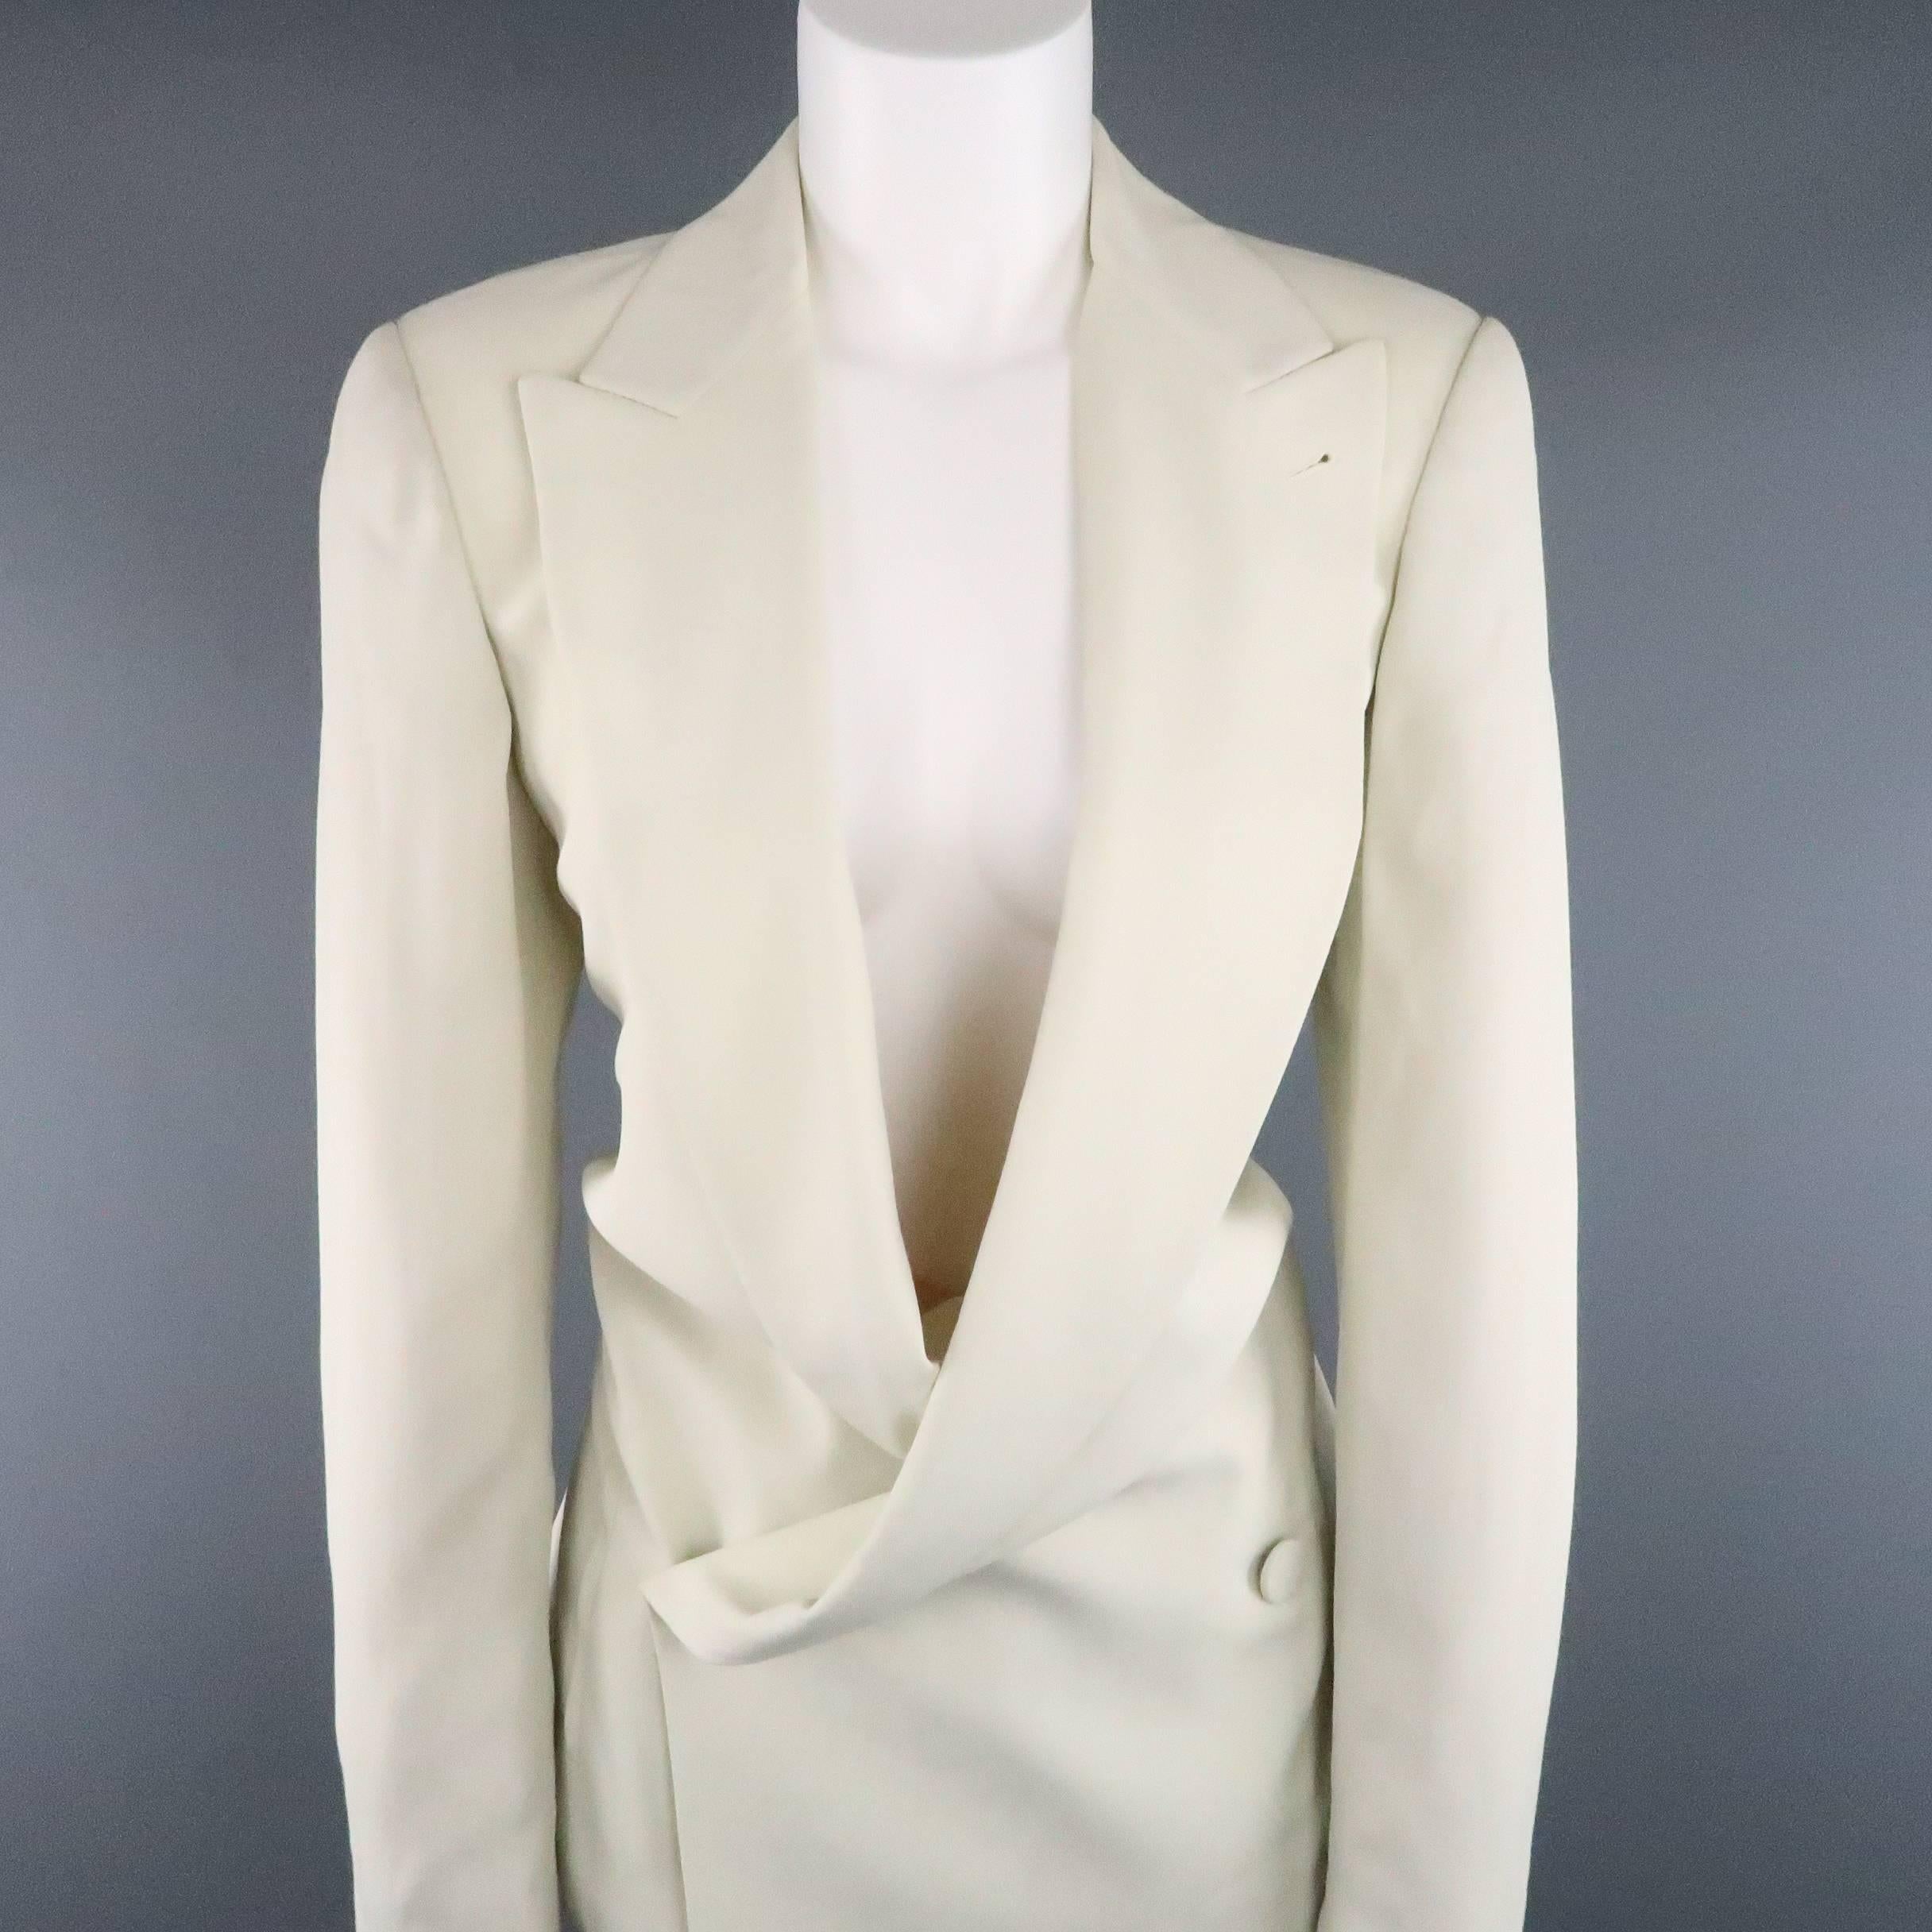 JEAN PAUL GAULTIER CLASSIQUE skirt suit comes in an off white rayon blend fabric and includes a  double breasted, peak lapel sport coat with fabric button cuffs and matching button side pencil skirt. Some small marks from storage. As-Is. Made in